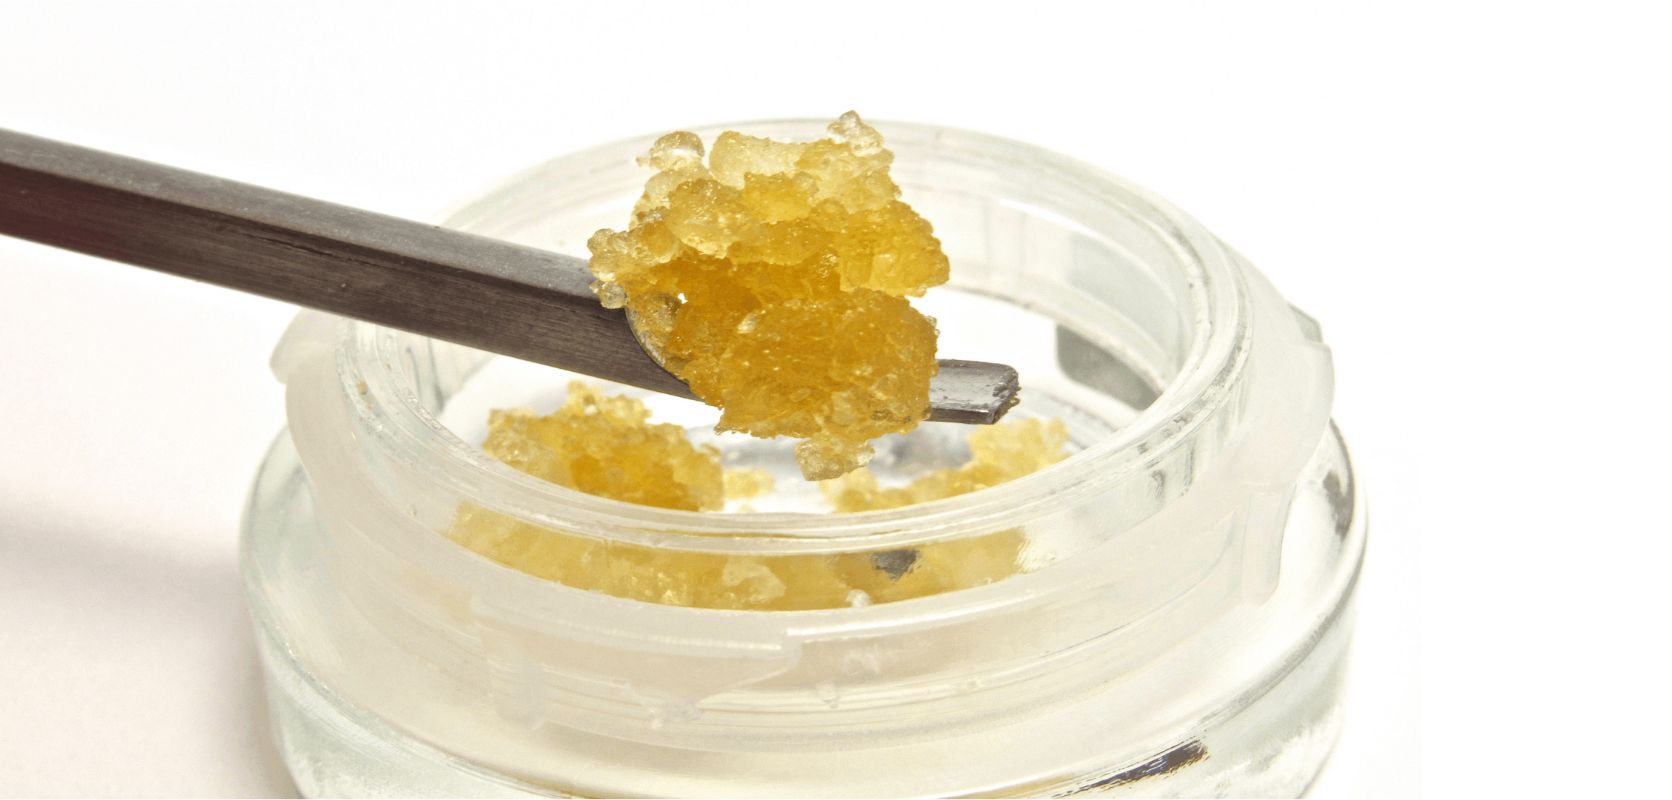 Live resin is cannabis concentrate made from freshly harvested buds that are flash-frozen. Freezing the buds immediately after harvesting helps preserve the rich terpene and cannabinoid content of the plant material. 